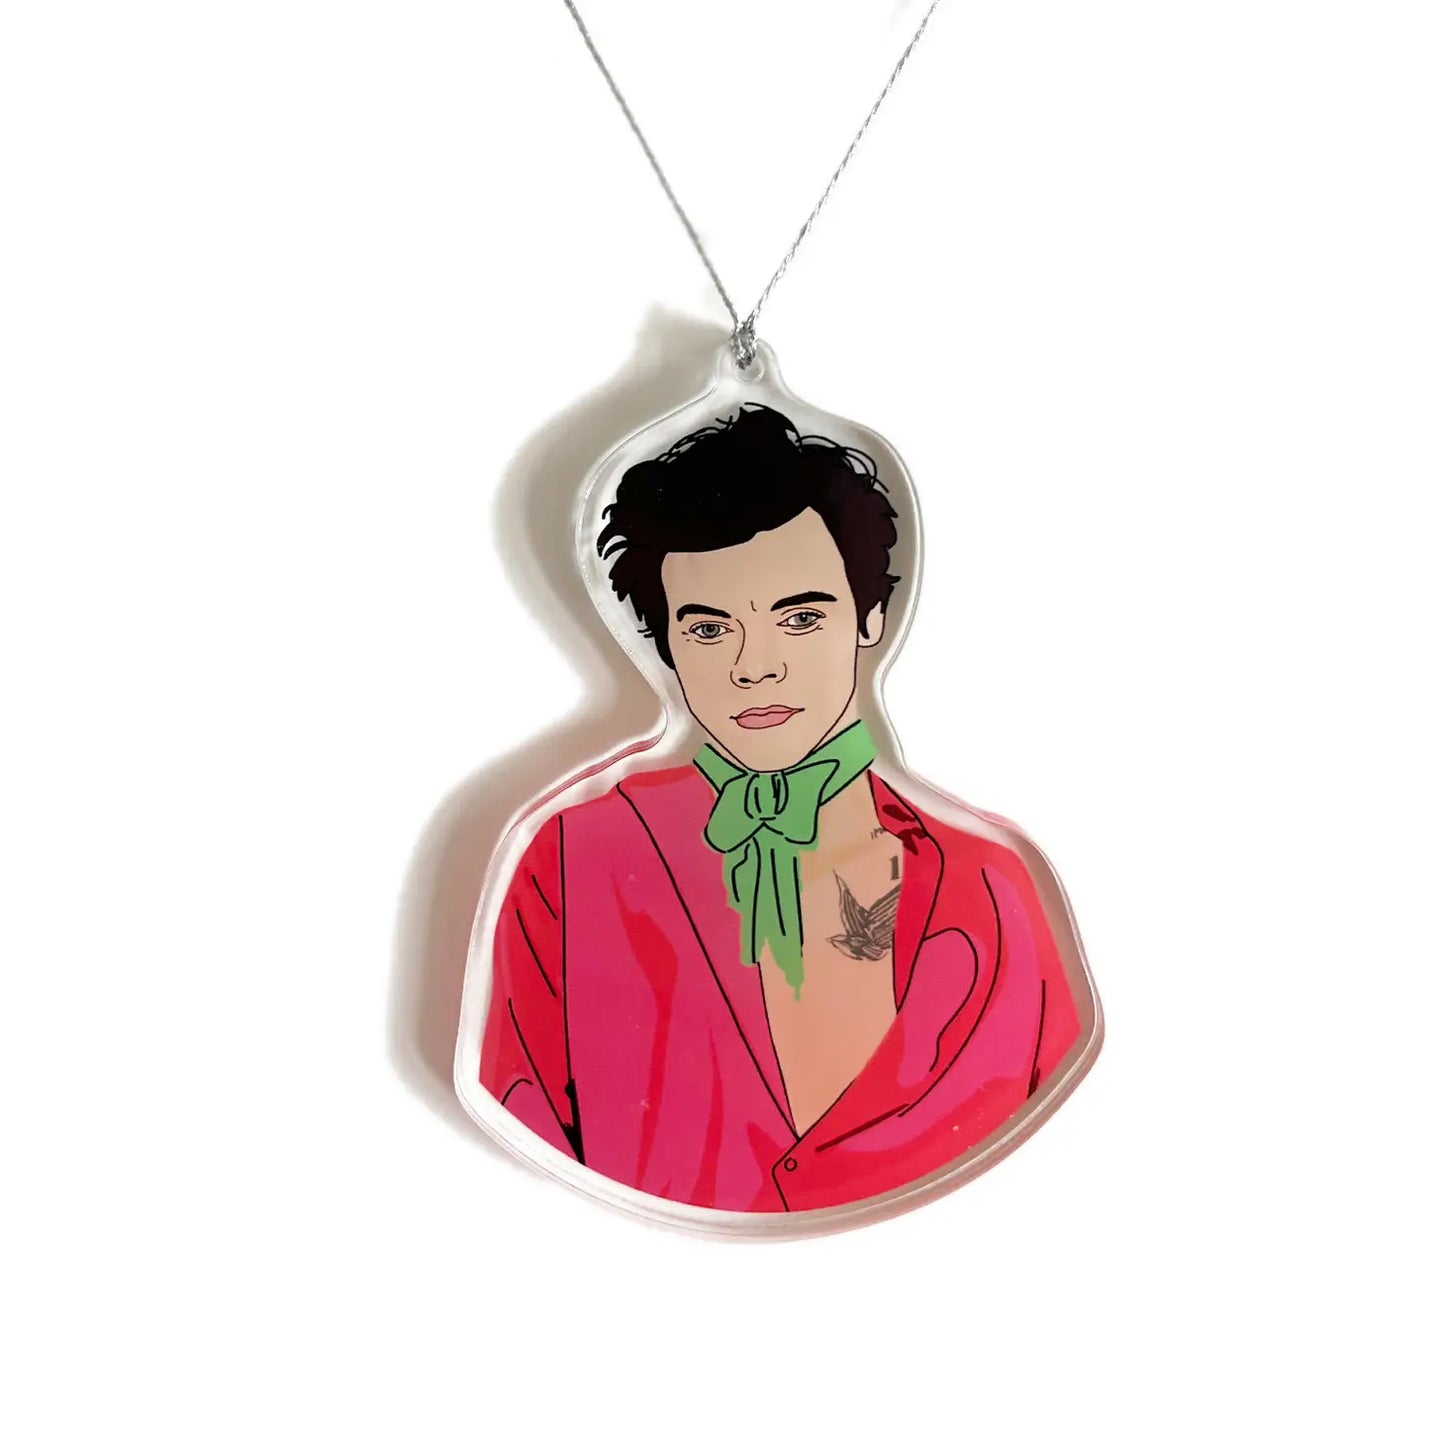 Harry Styles Inspired Holiday Ornament